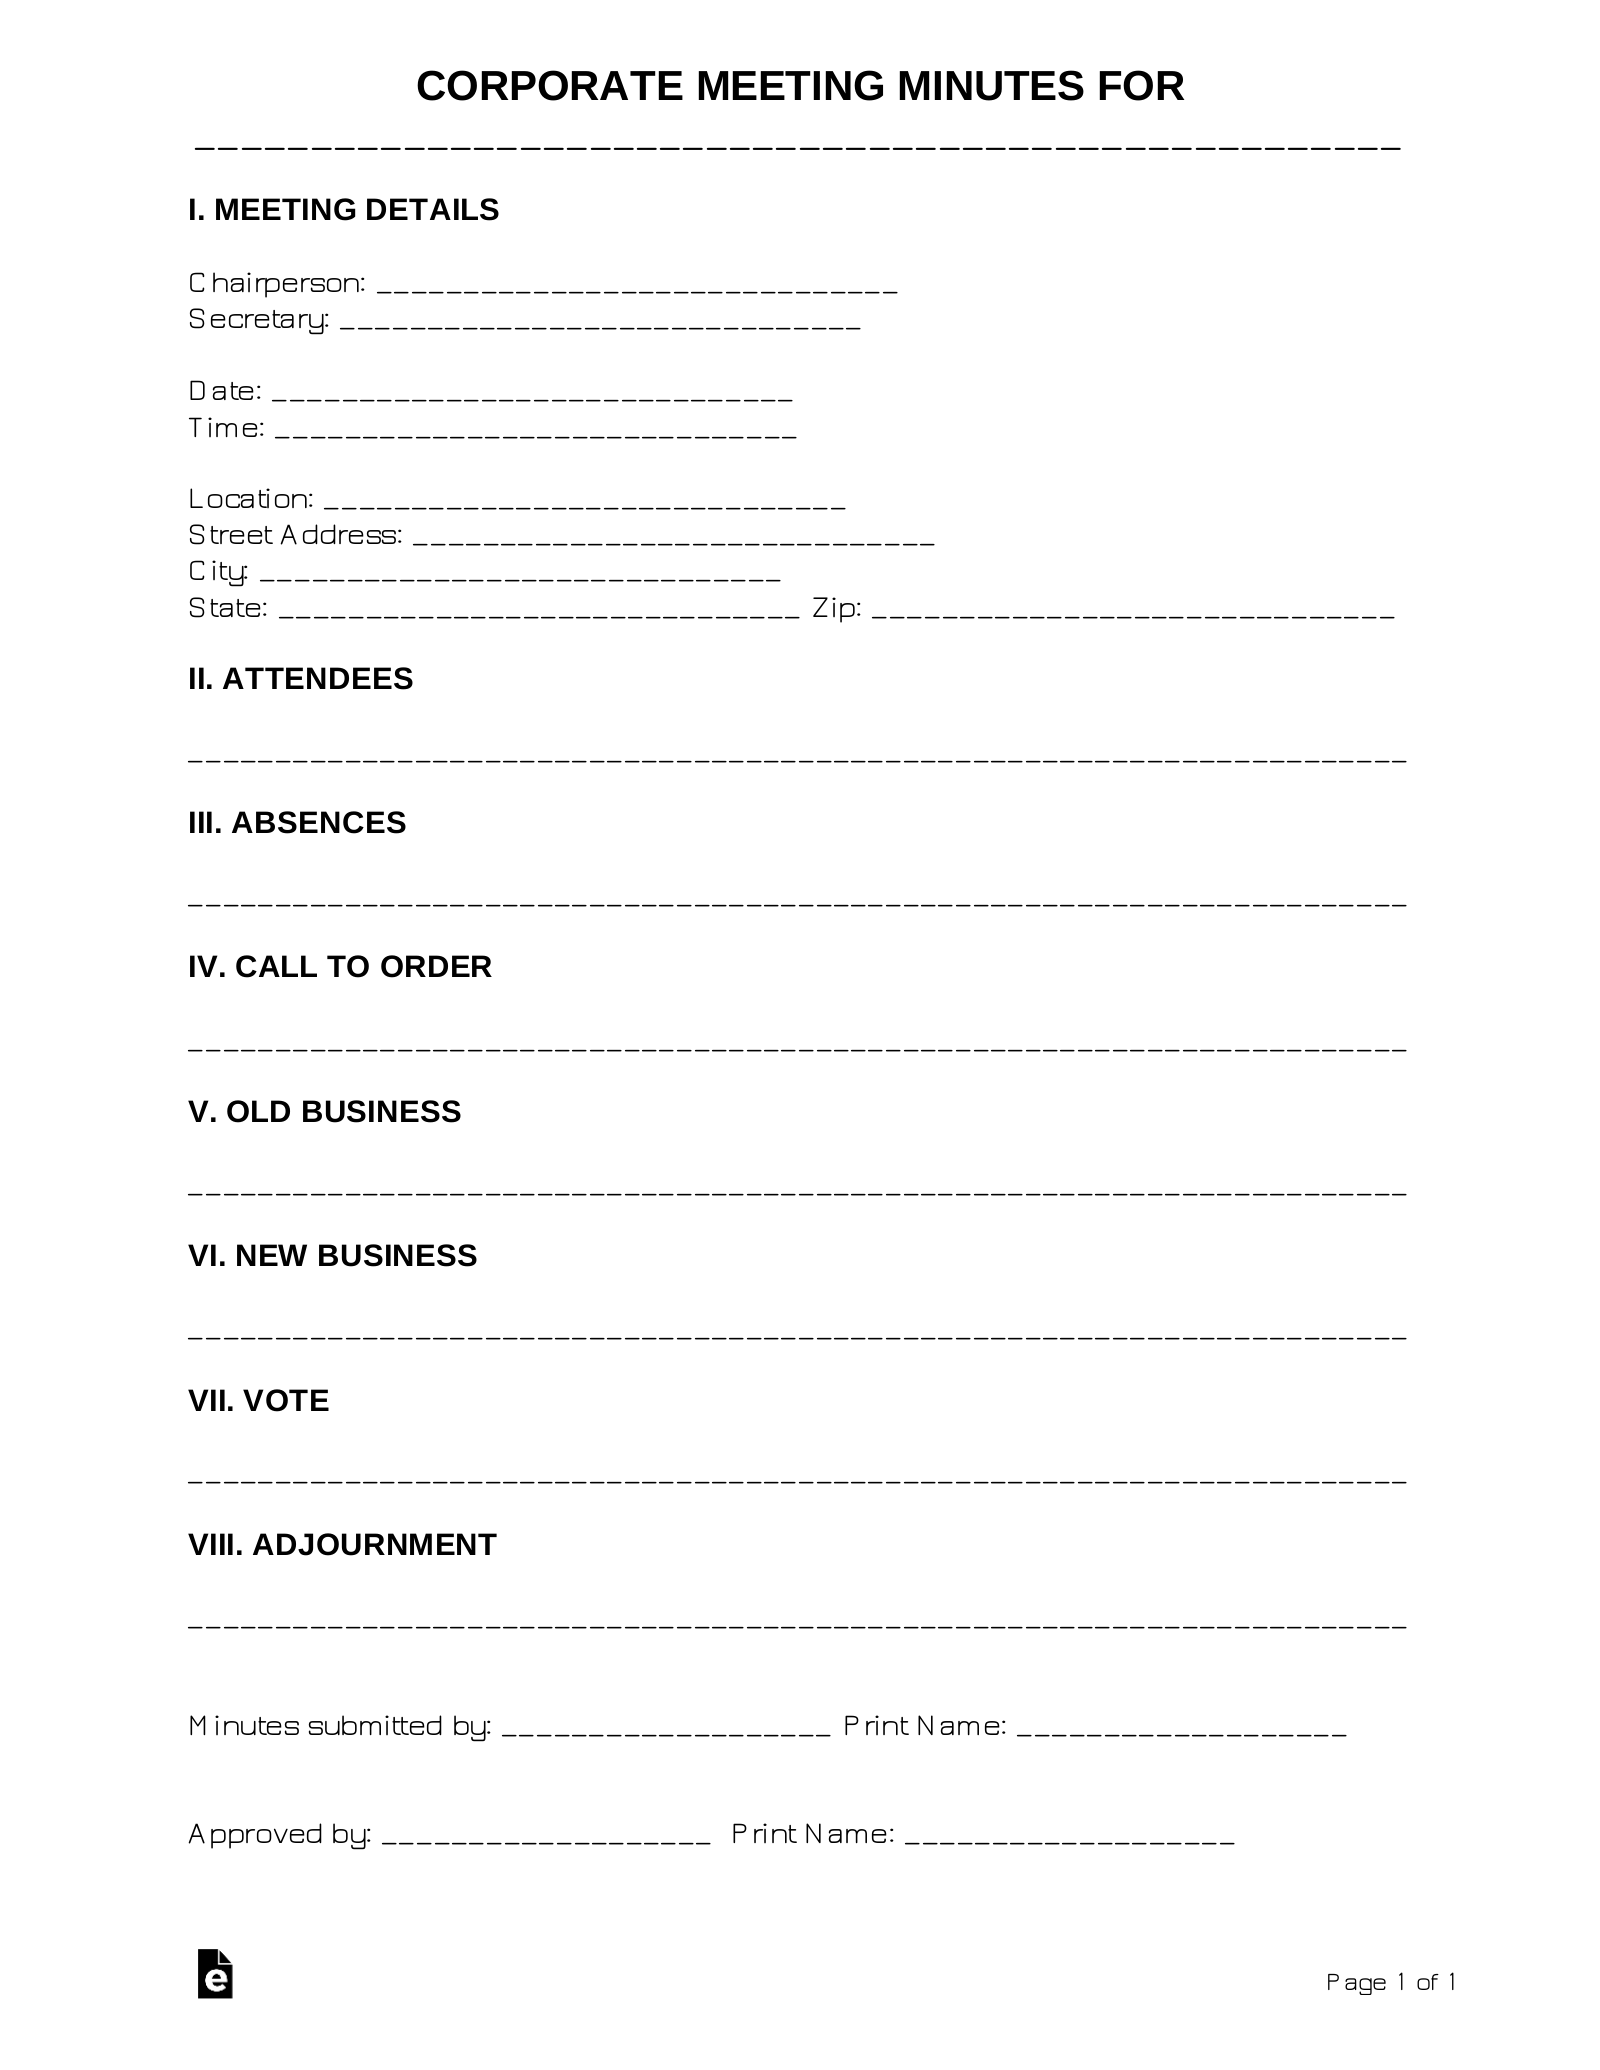 Free Corporate Meeting Minutes Template Sample PDF Word EForms